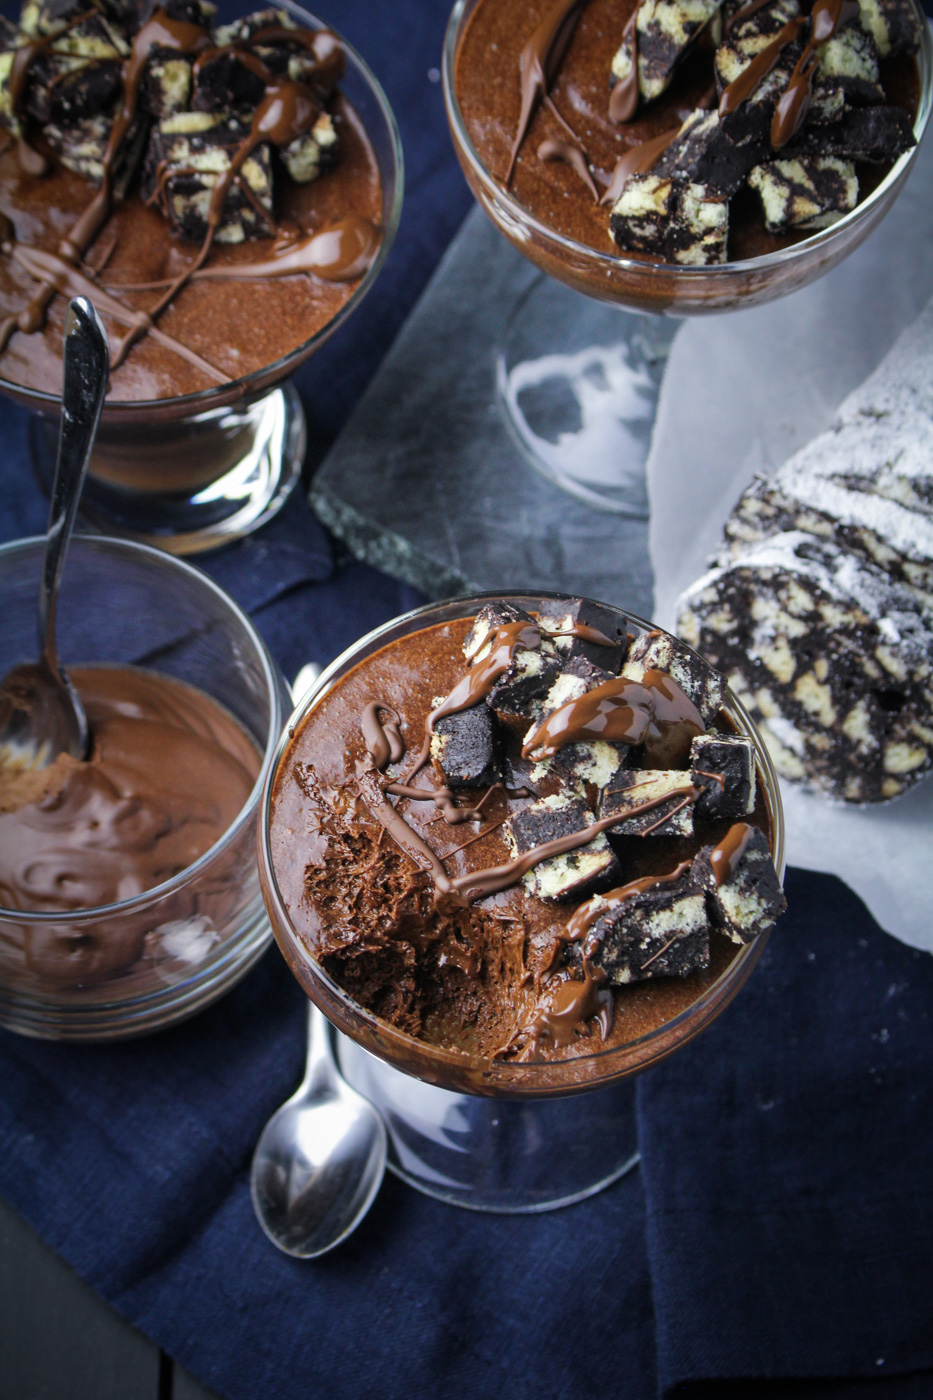 Portuguese Chocolate Mousse with Chocolate Salami {Katie at the Kitchen Door}